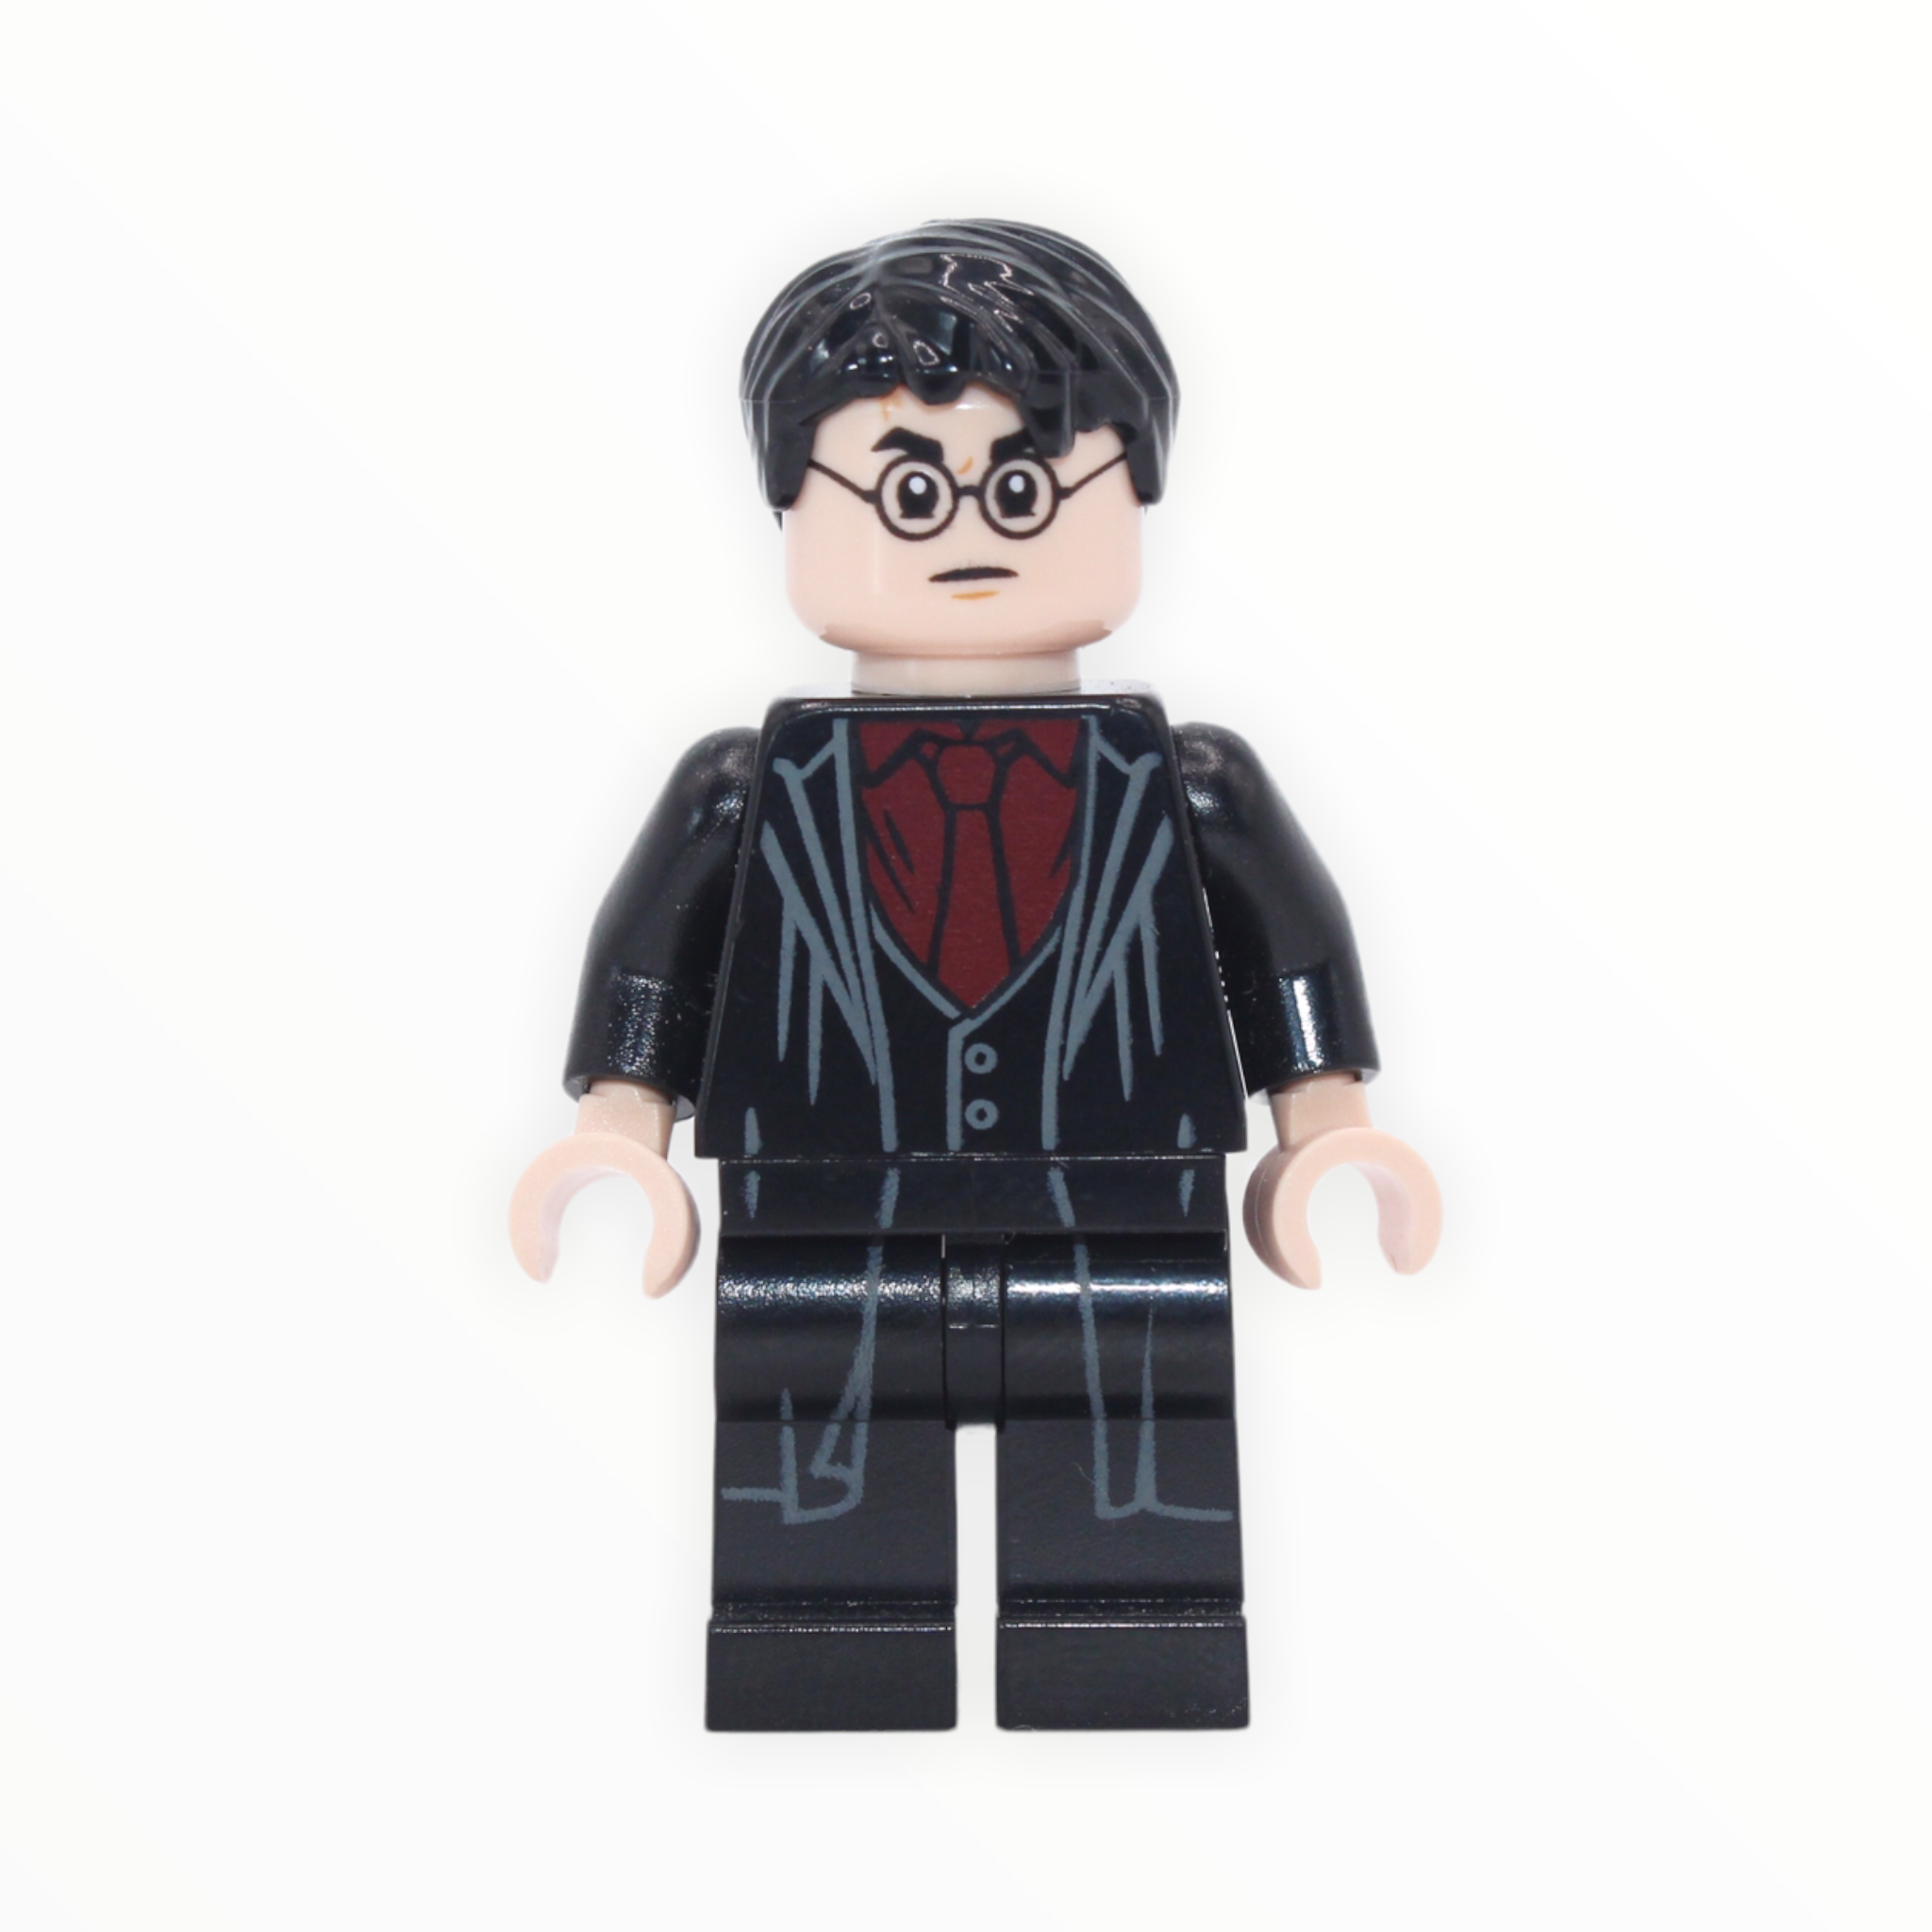 Harry Potter (dark red shirt and tie, 2020)